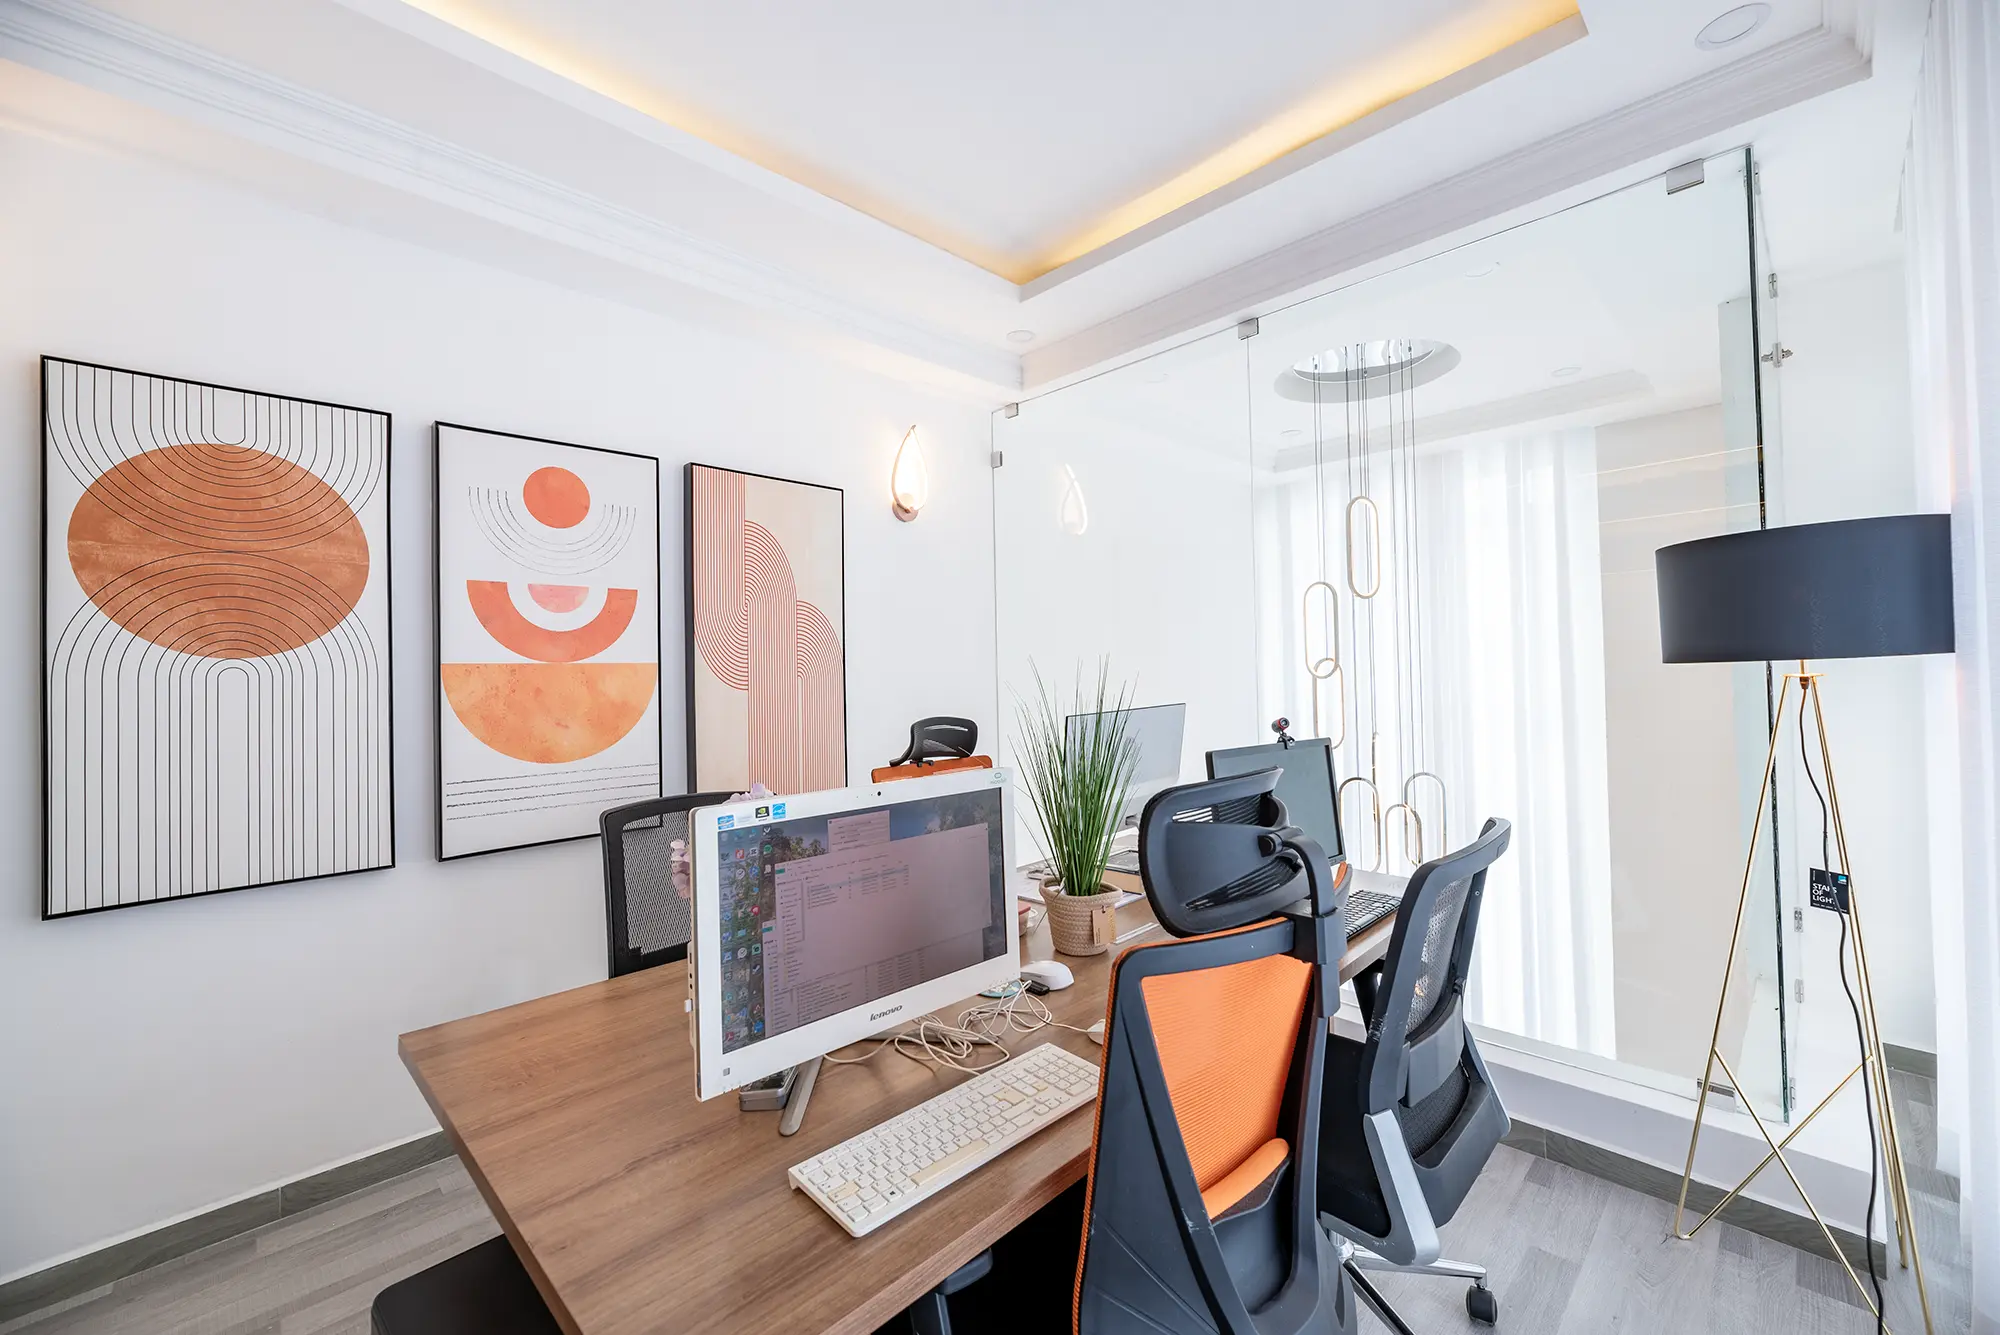 Home office setting featuring walls adorned with canvases, each capturing distinct Kenyan artistry and motifs, emphasizing the unique touch and elegance of local craftsmanship in a workspace environment